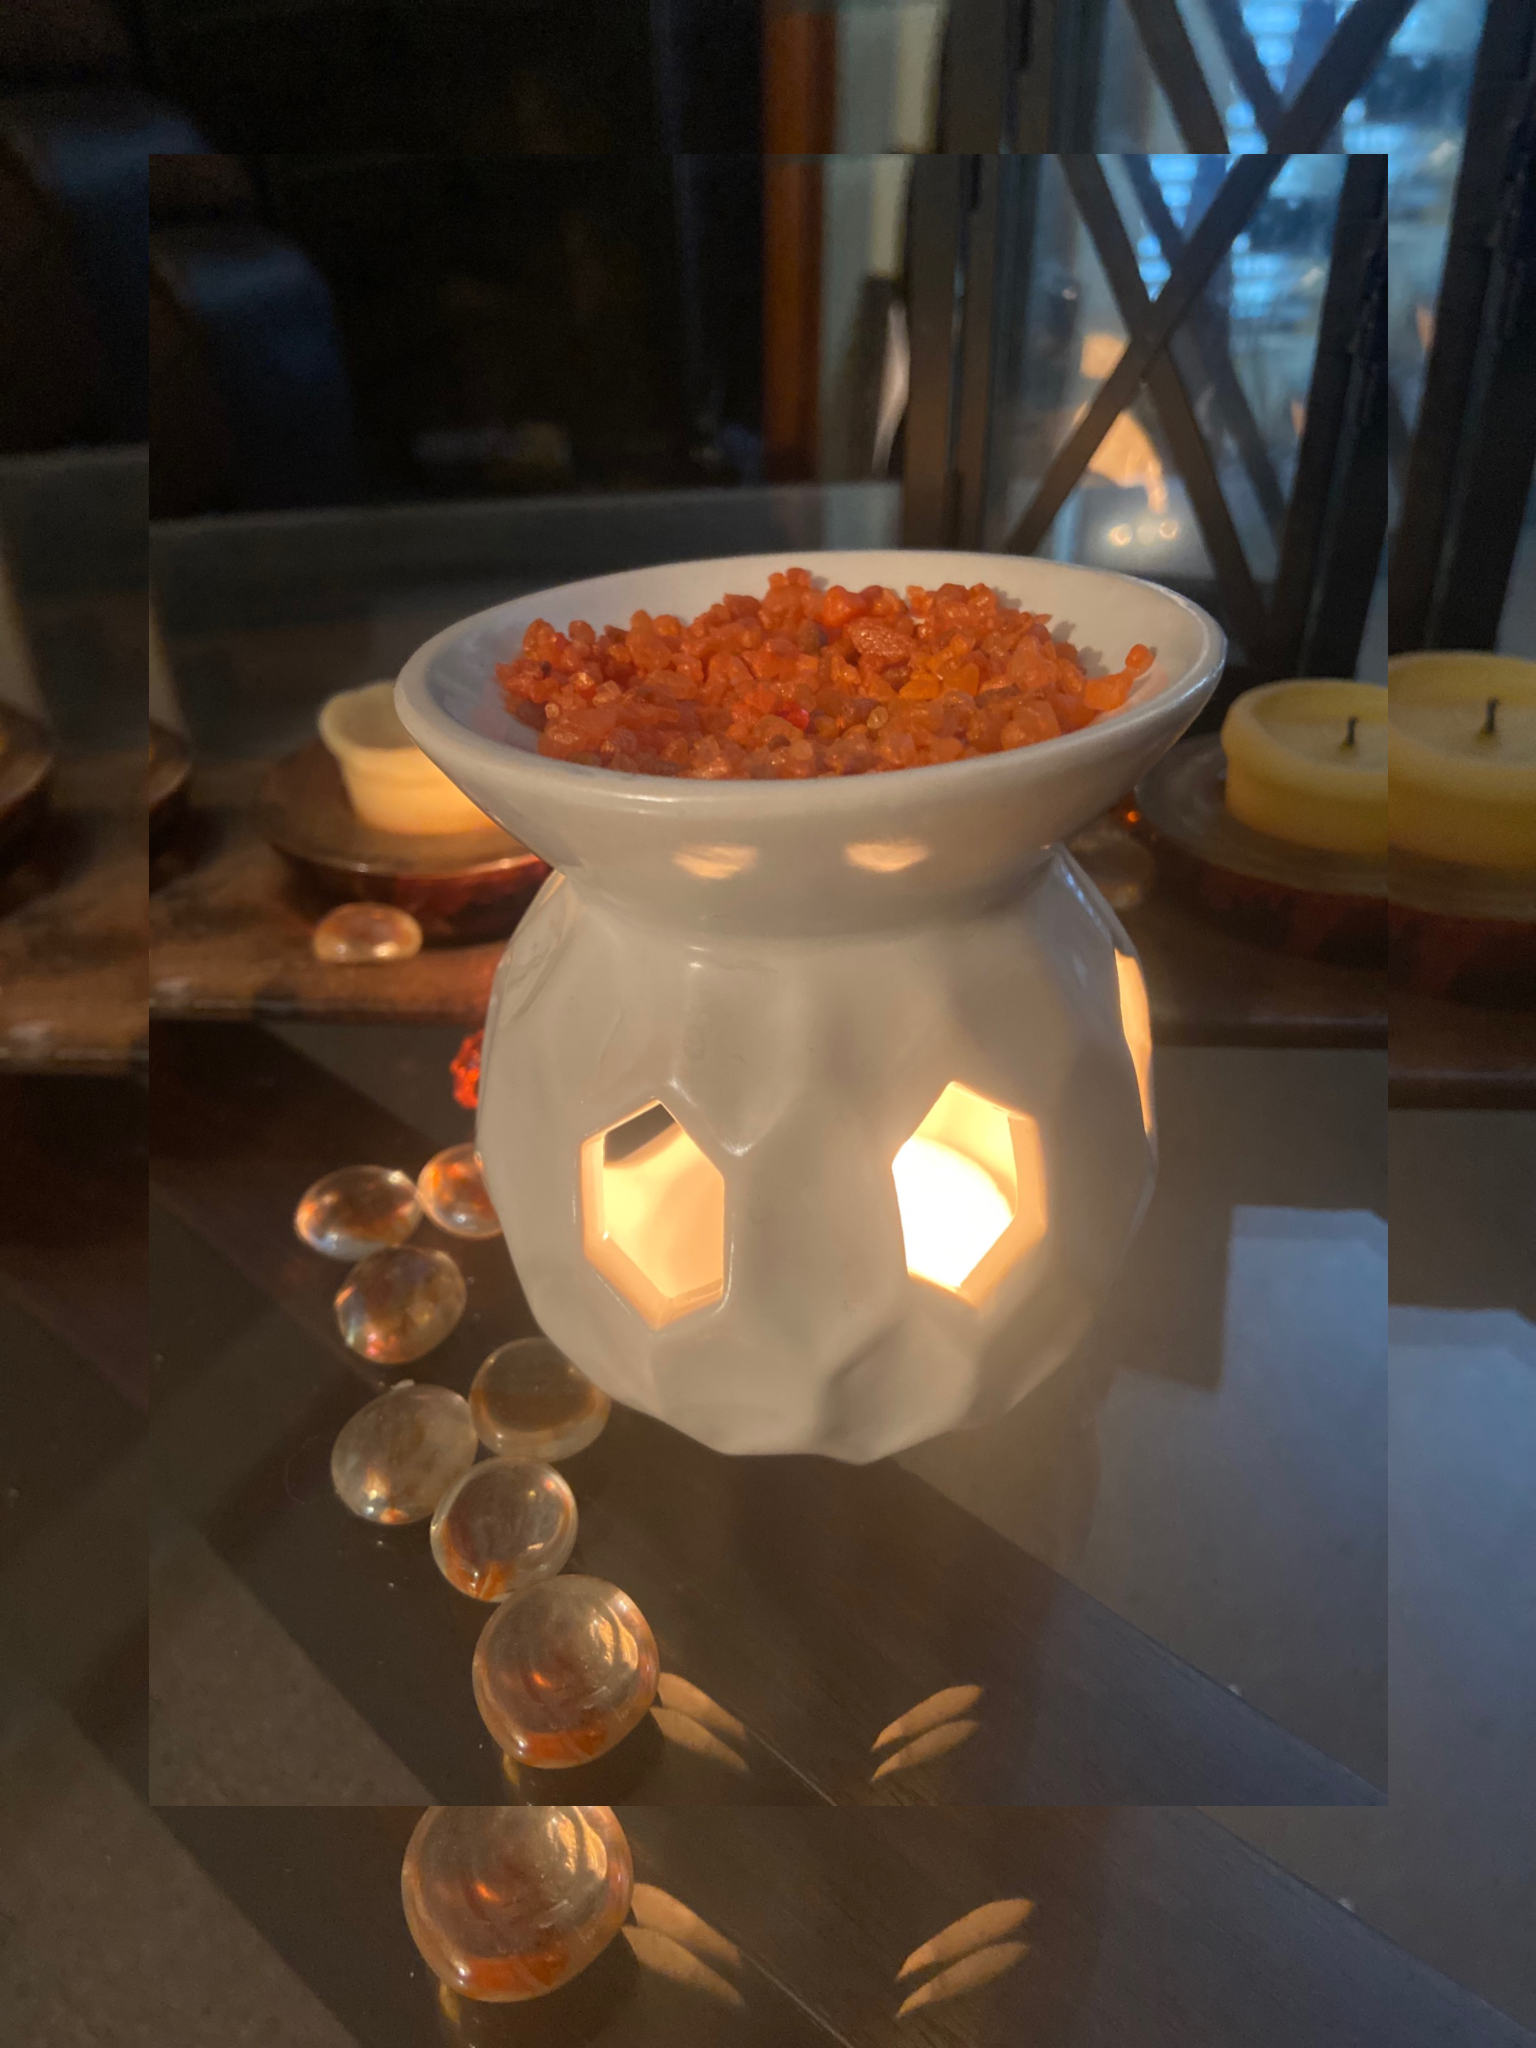 Elevate your home's ambiance with our highly fragrant Boss Wick Aroma Bits! Experience the delightful scent of our scented crystals in a variety of fragrances. Simply use with a tea light or electric warmer approved for wax melts. Easy clean up, no messy wax. Transform any space into a cozy oasis.